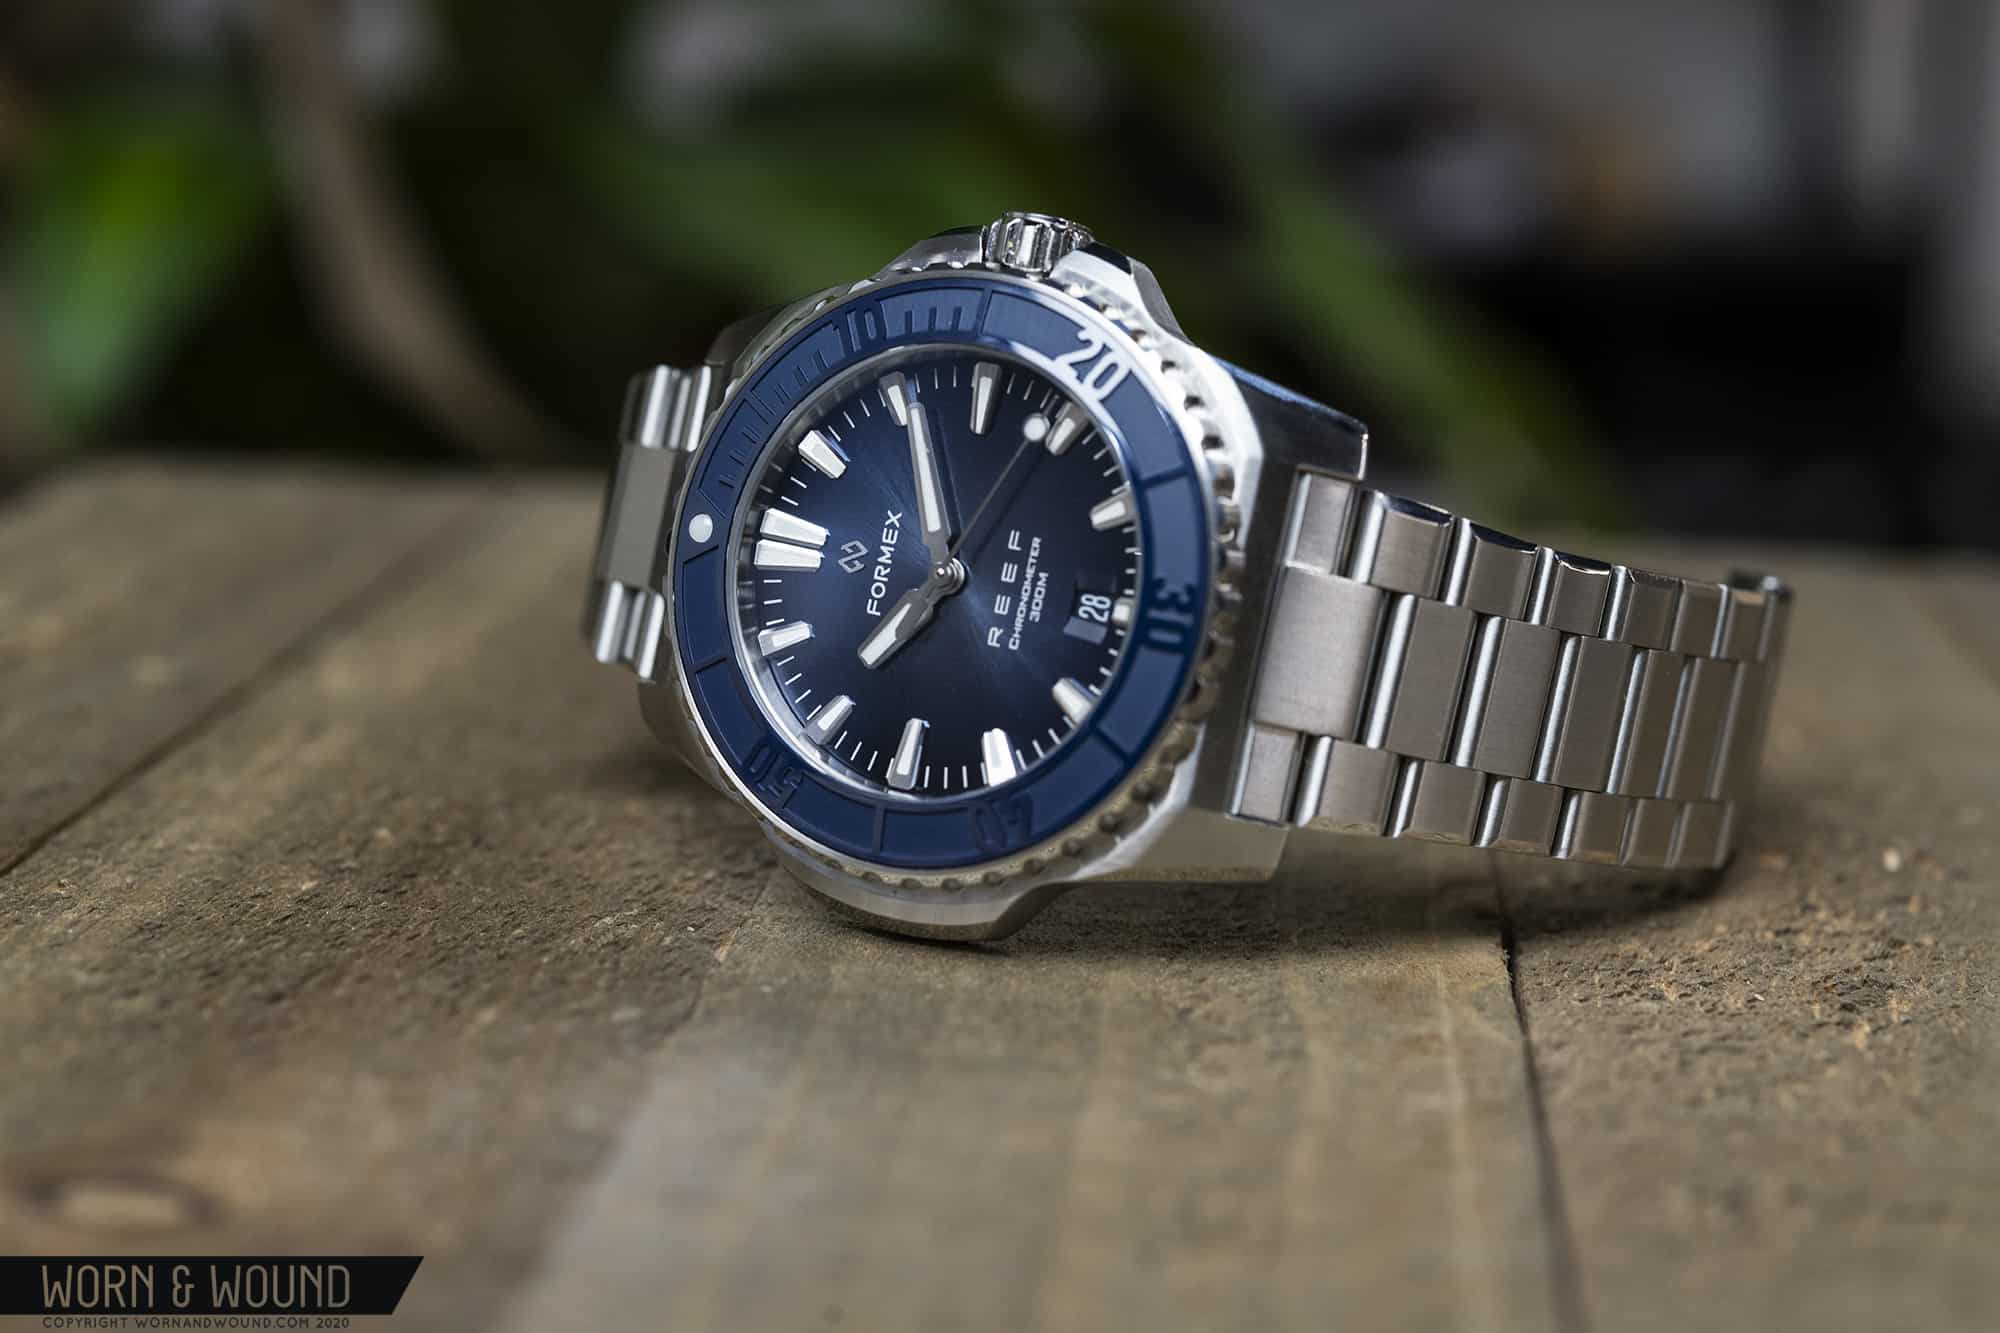 Hands-On With The All New Formex Reef